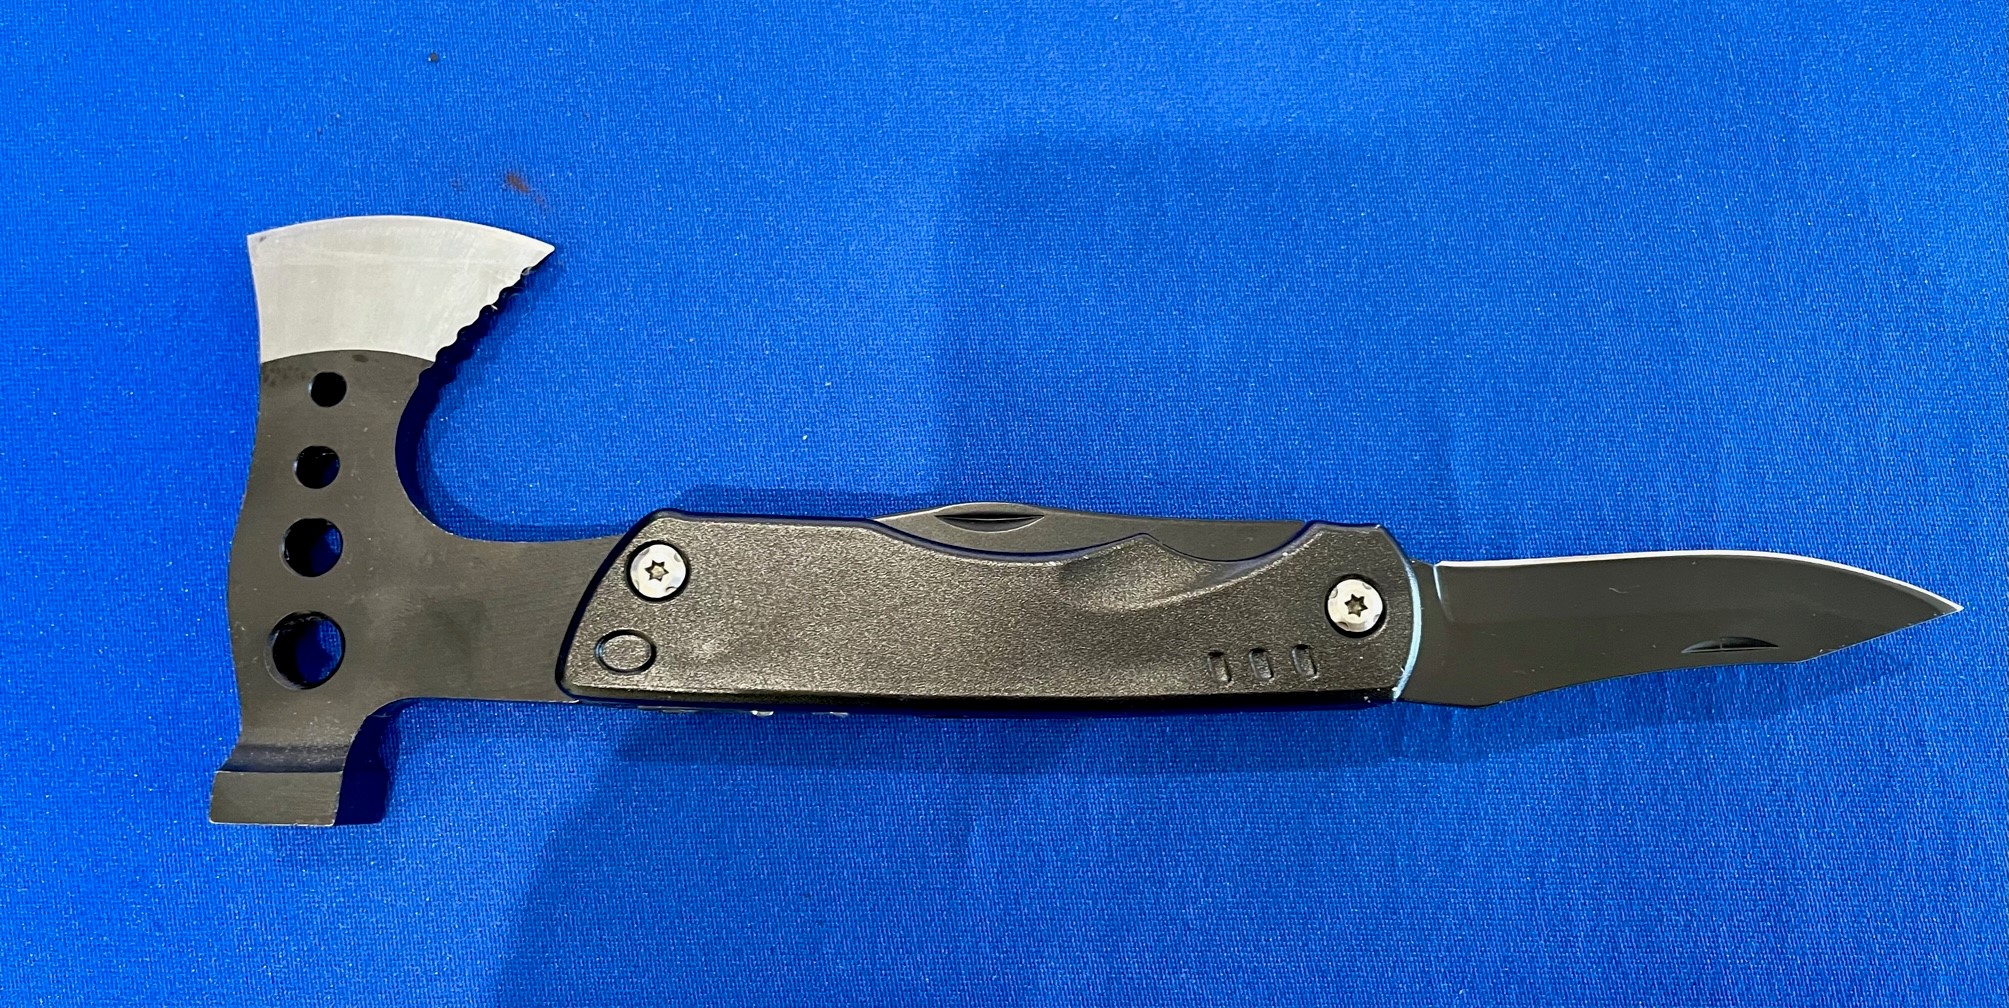 A multi-tool with a hatchet at one end and a knife at the other that someone recently brought to a TSA security checkpoint at BWI Airport recently. (TSA photo)